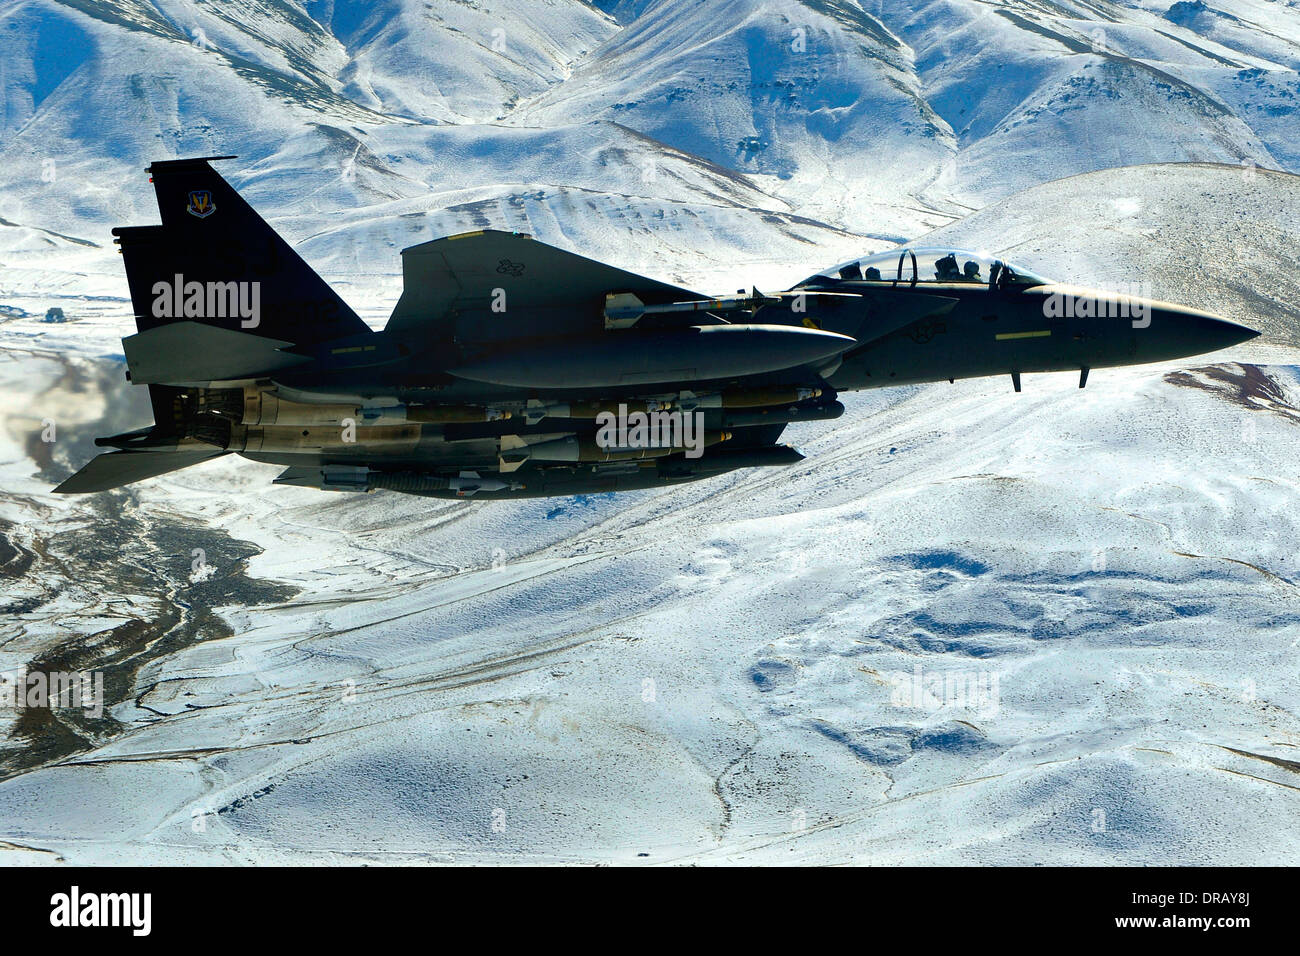 U.S. Air Force F-15E Strike Eagle aircraft from the 335th Expeditionary Fighter Squadron at Bagram Air Field, Afghanistan Stock Photo